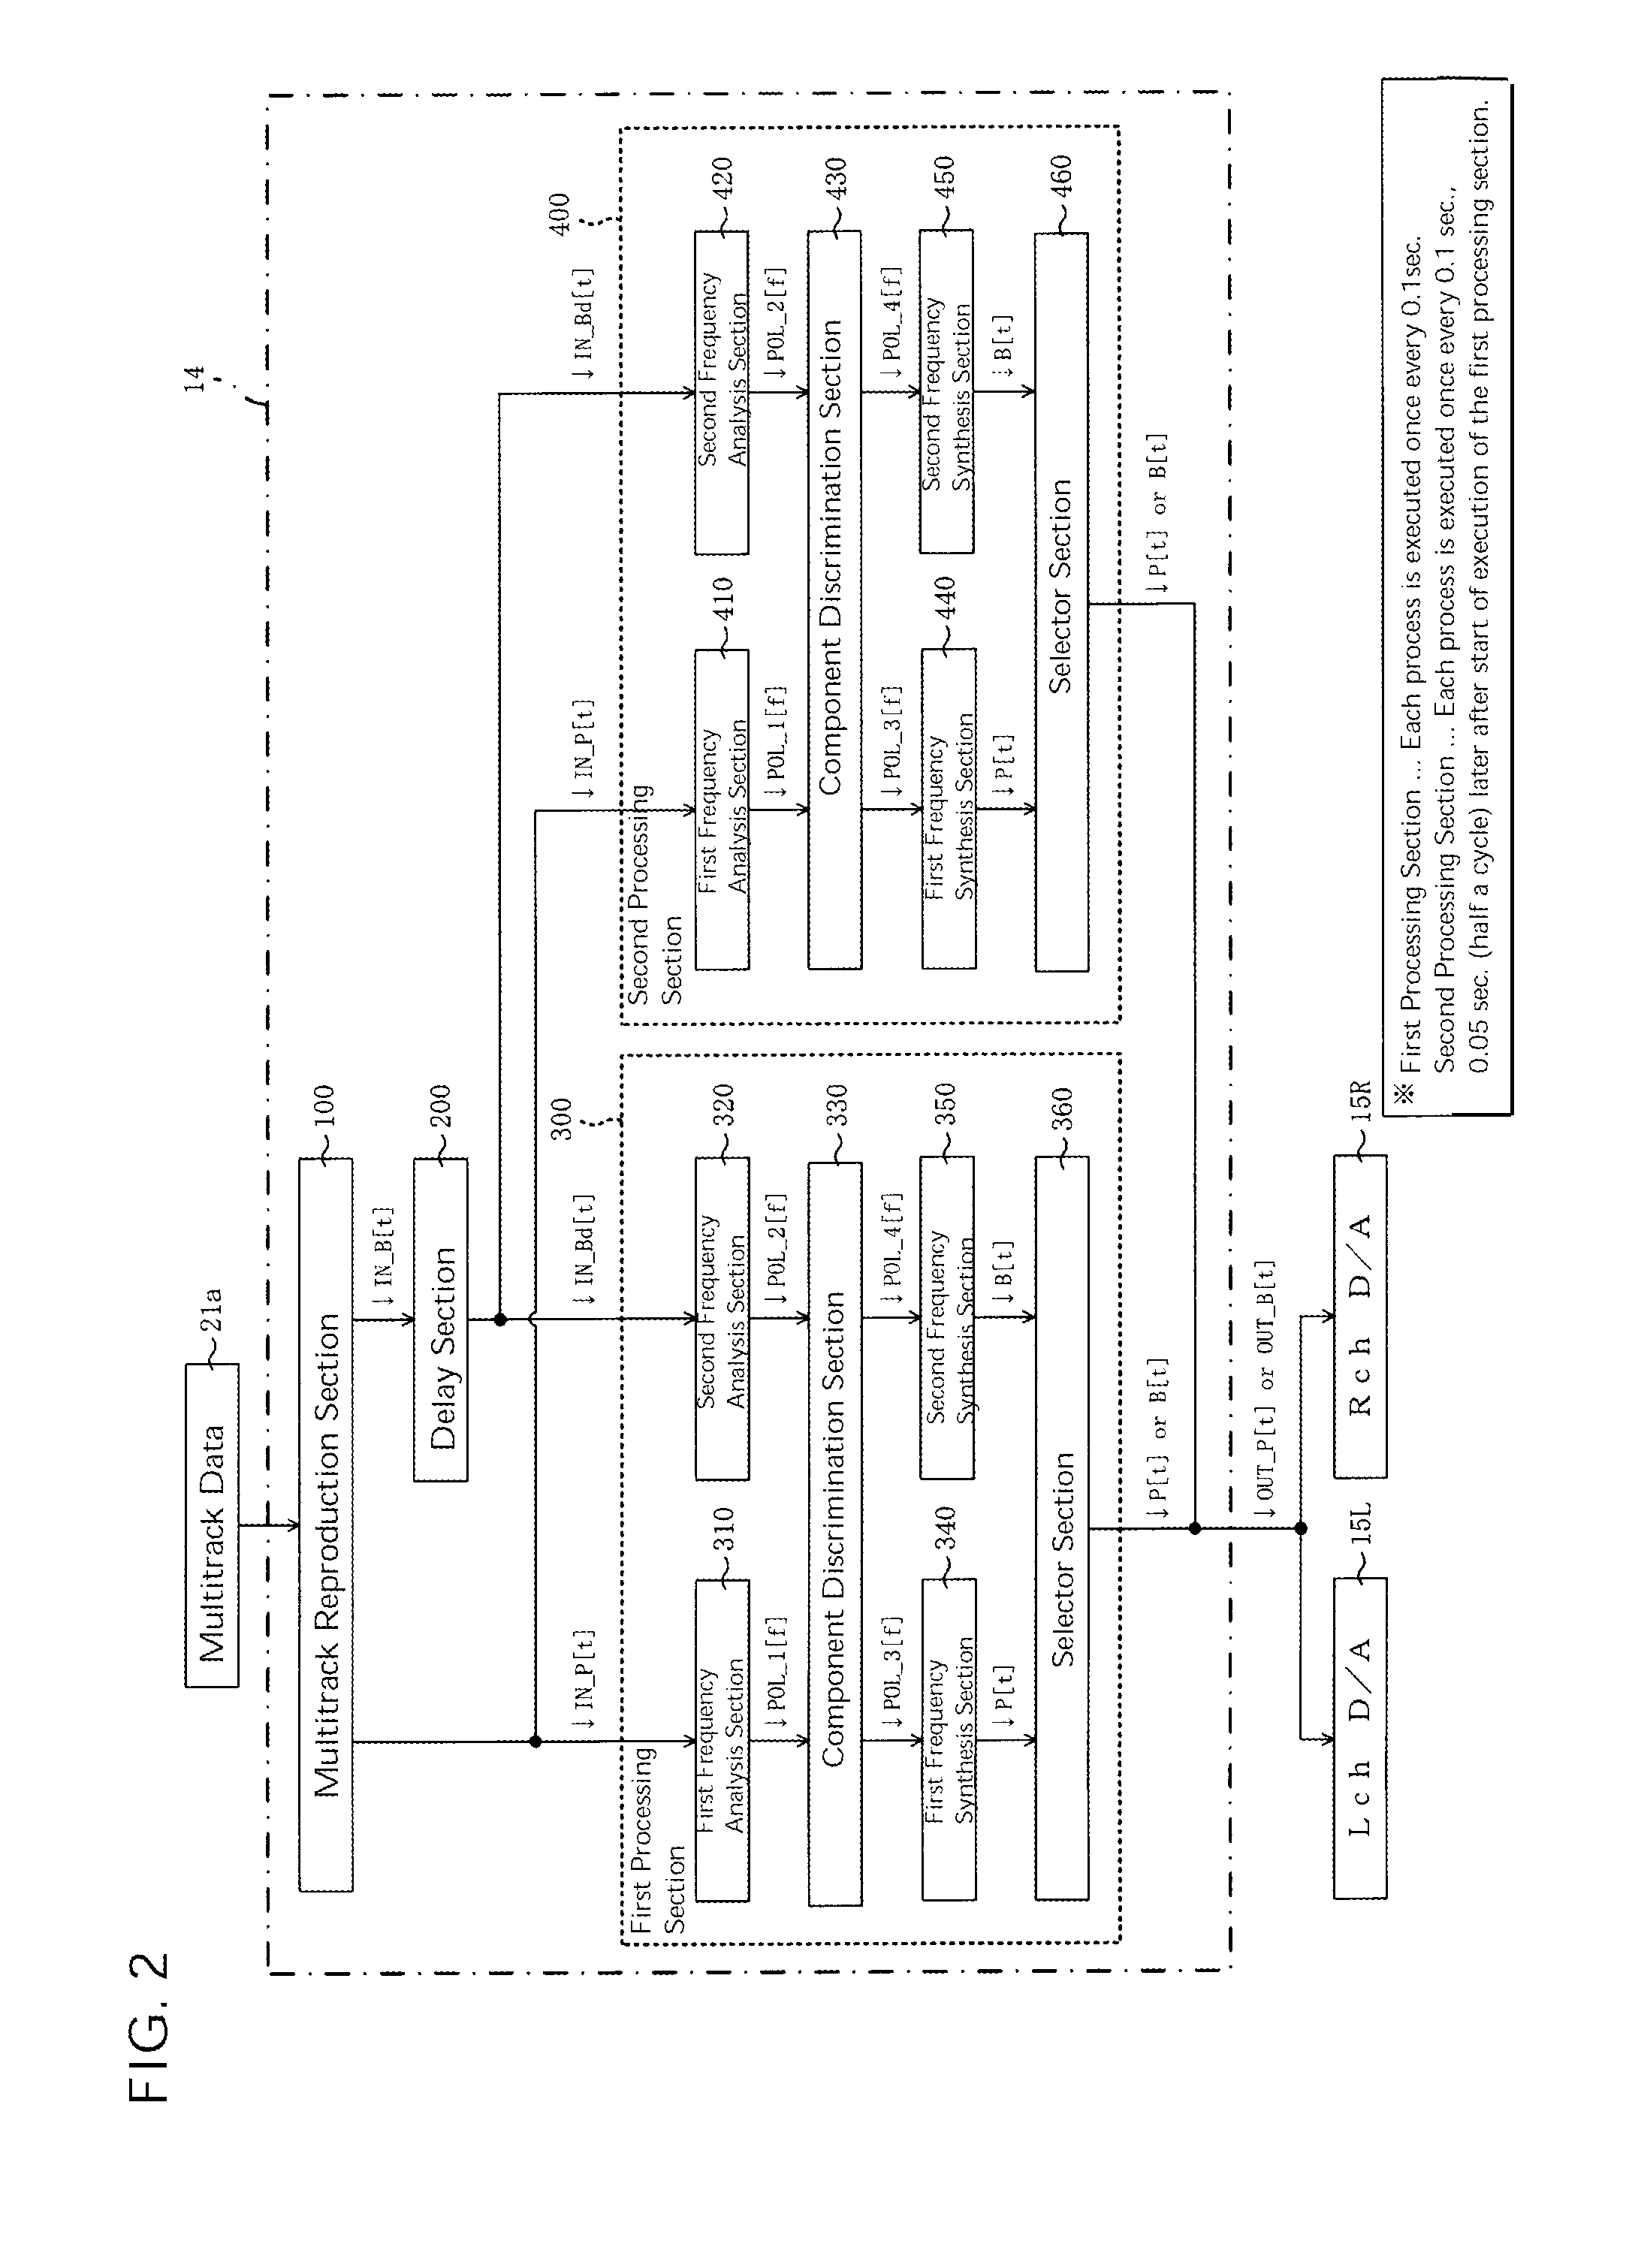 Sound signal processing device